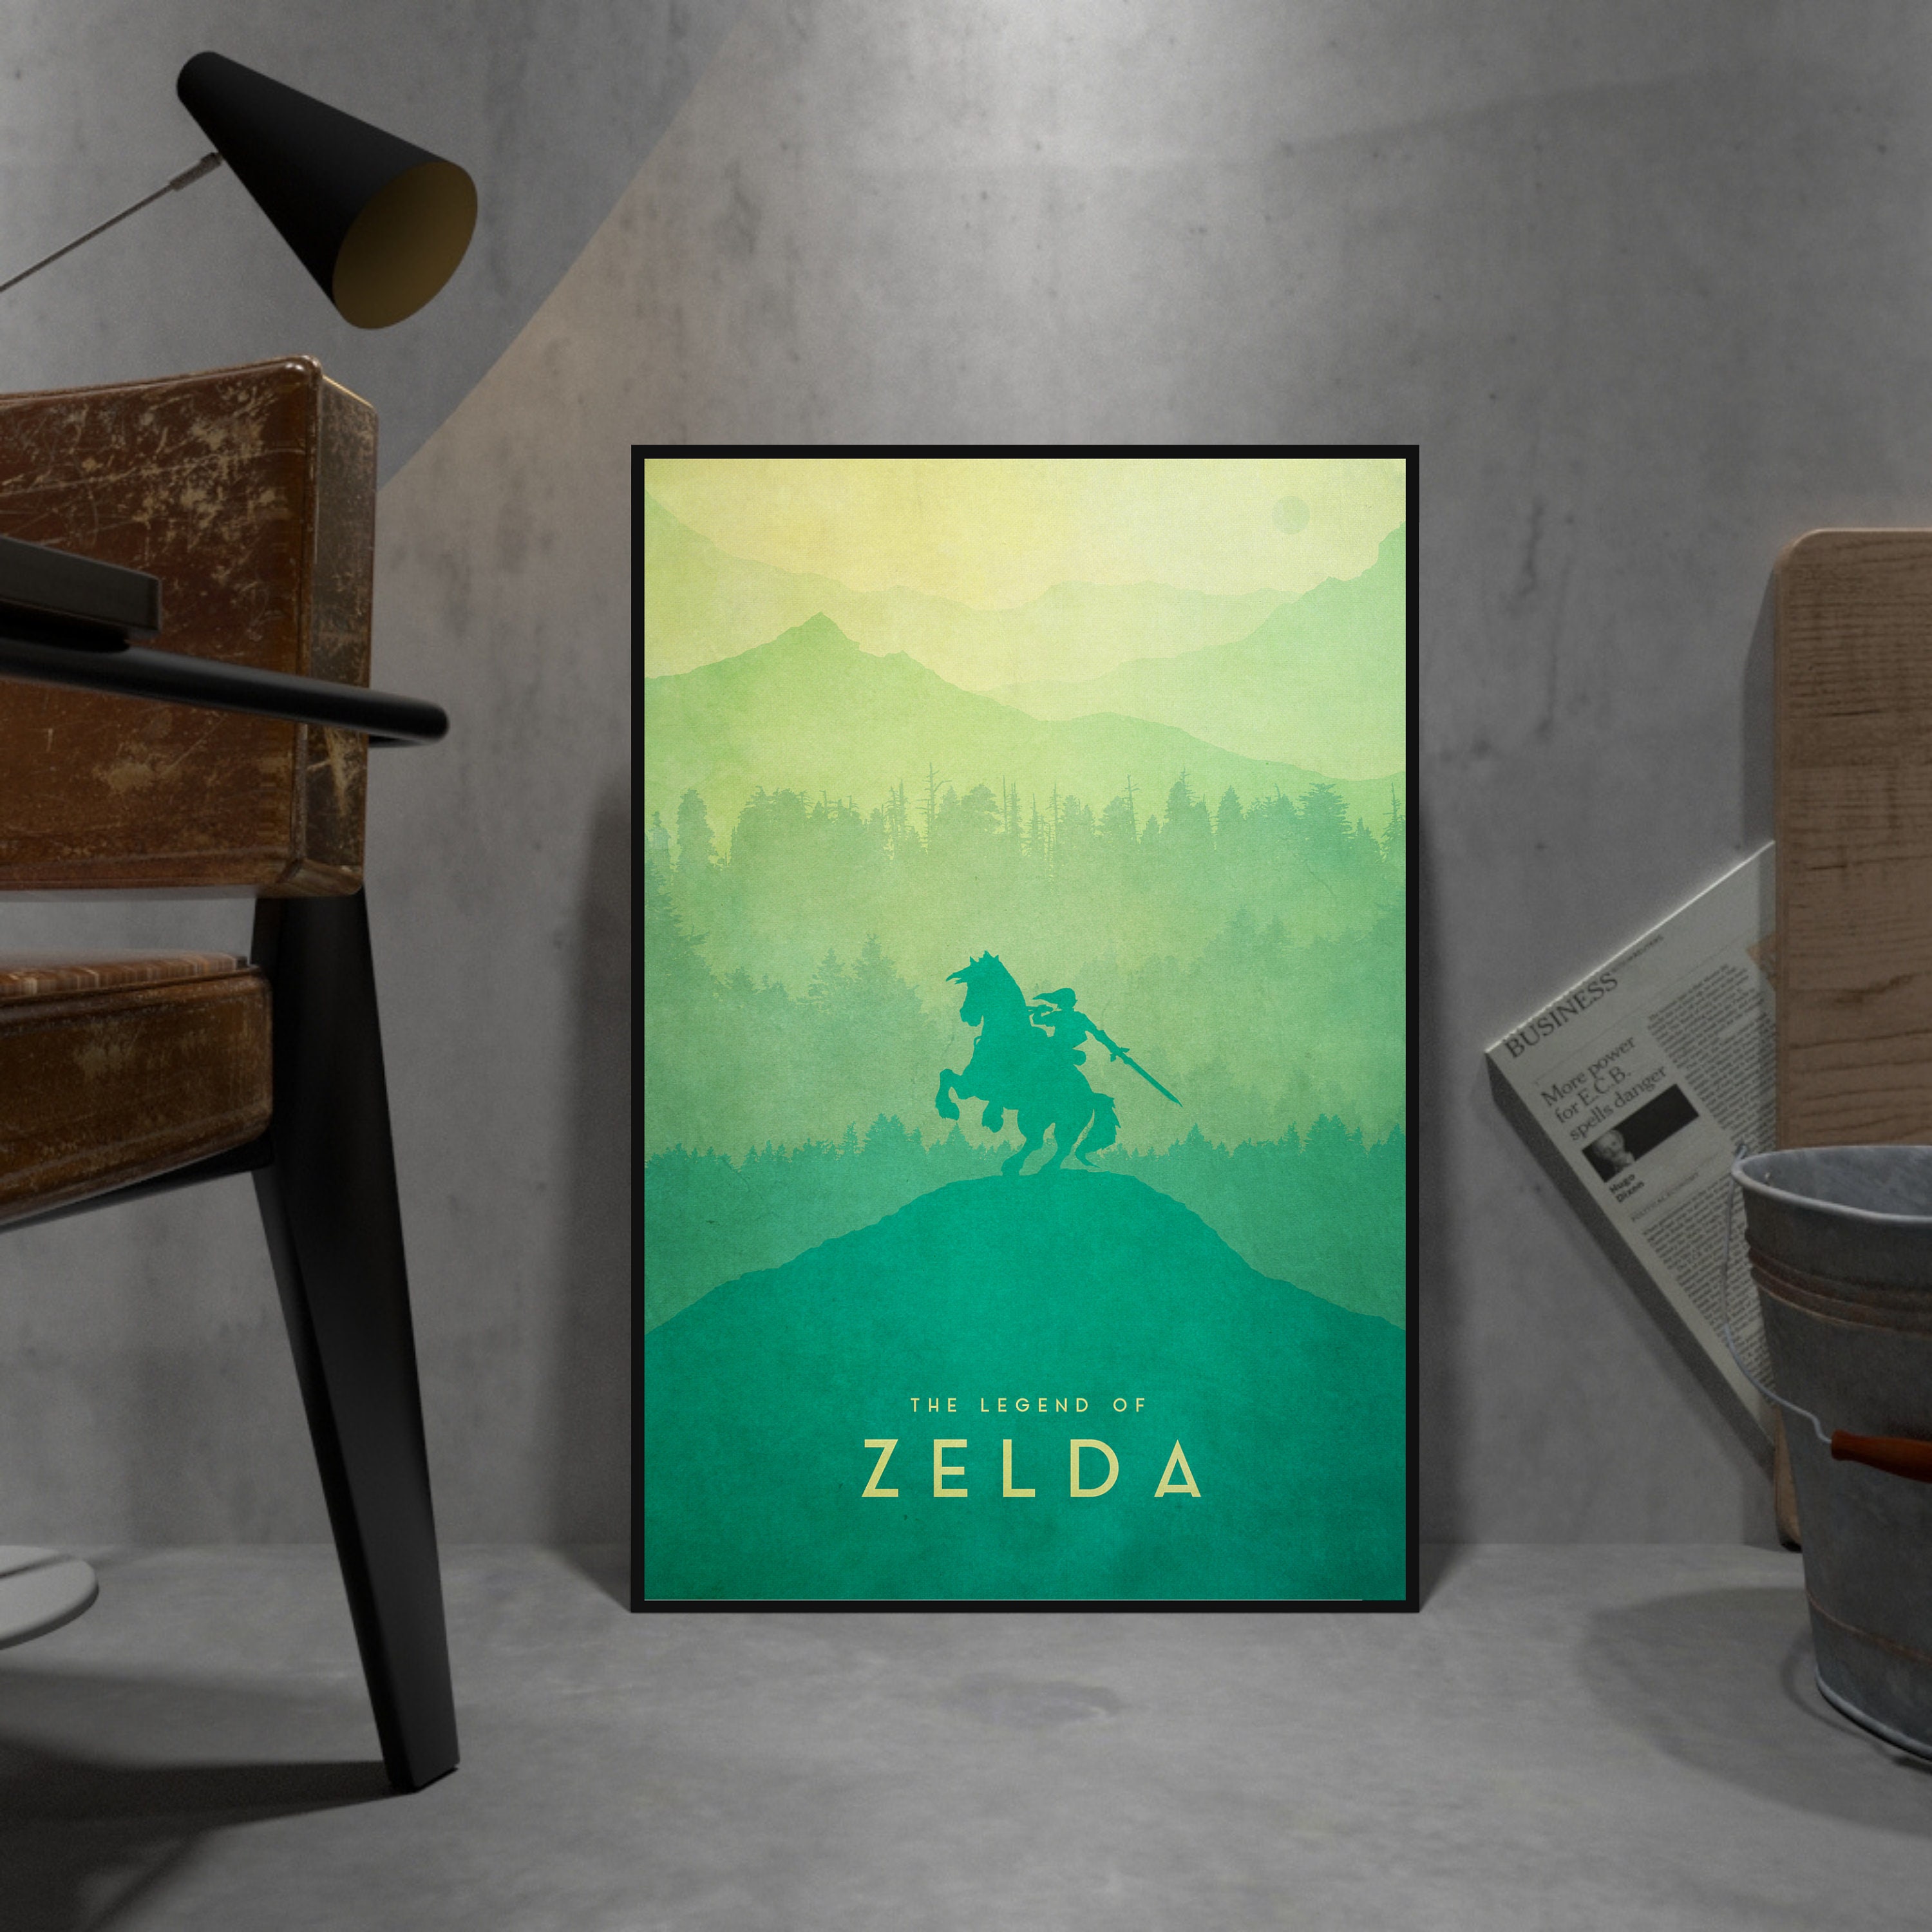  Zelda Poster - Zelda Songs of the Ocarina - Tears of the  Kingdom - 11 x 17 Framed Poster Wall Art, Ideal for Home Decor, Room Decor  & Living Room Decor: Posters & Prints